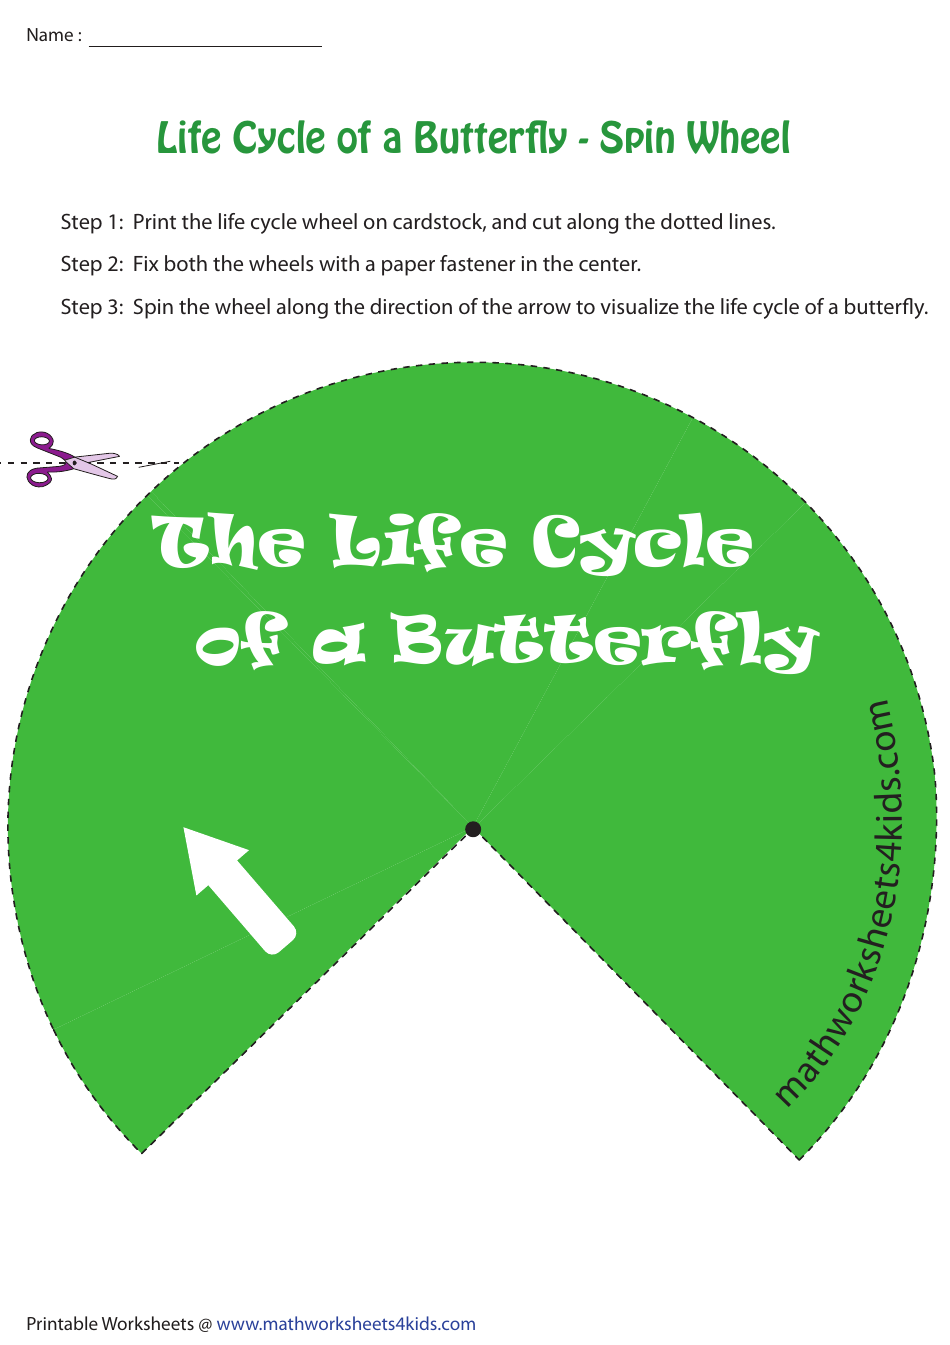 Butterfly Life Cycle Spin Wheel, Page 1